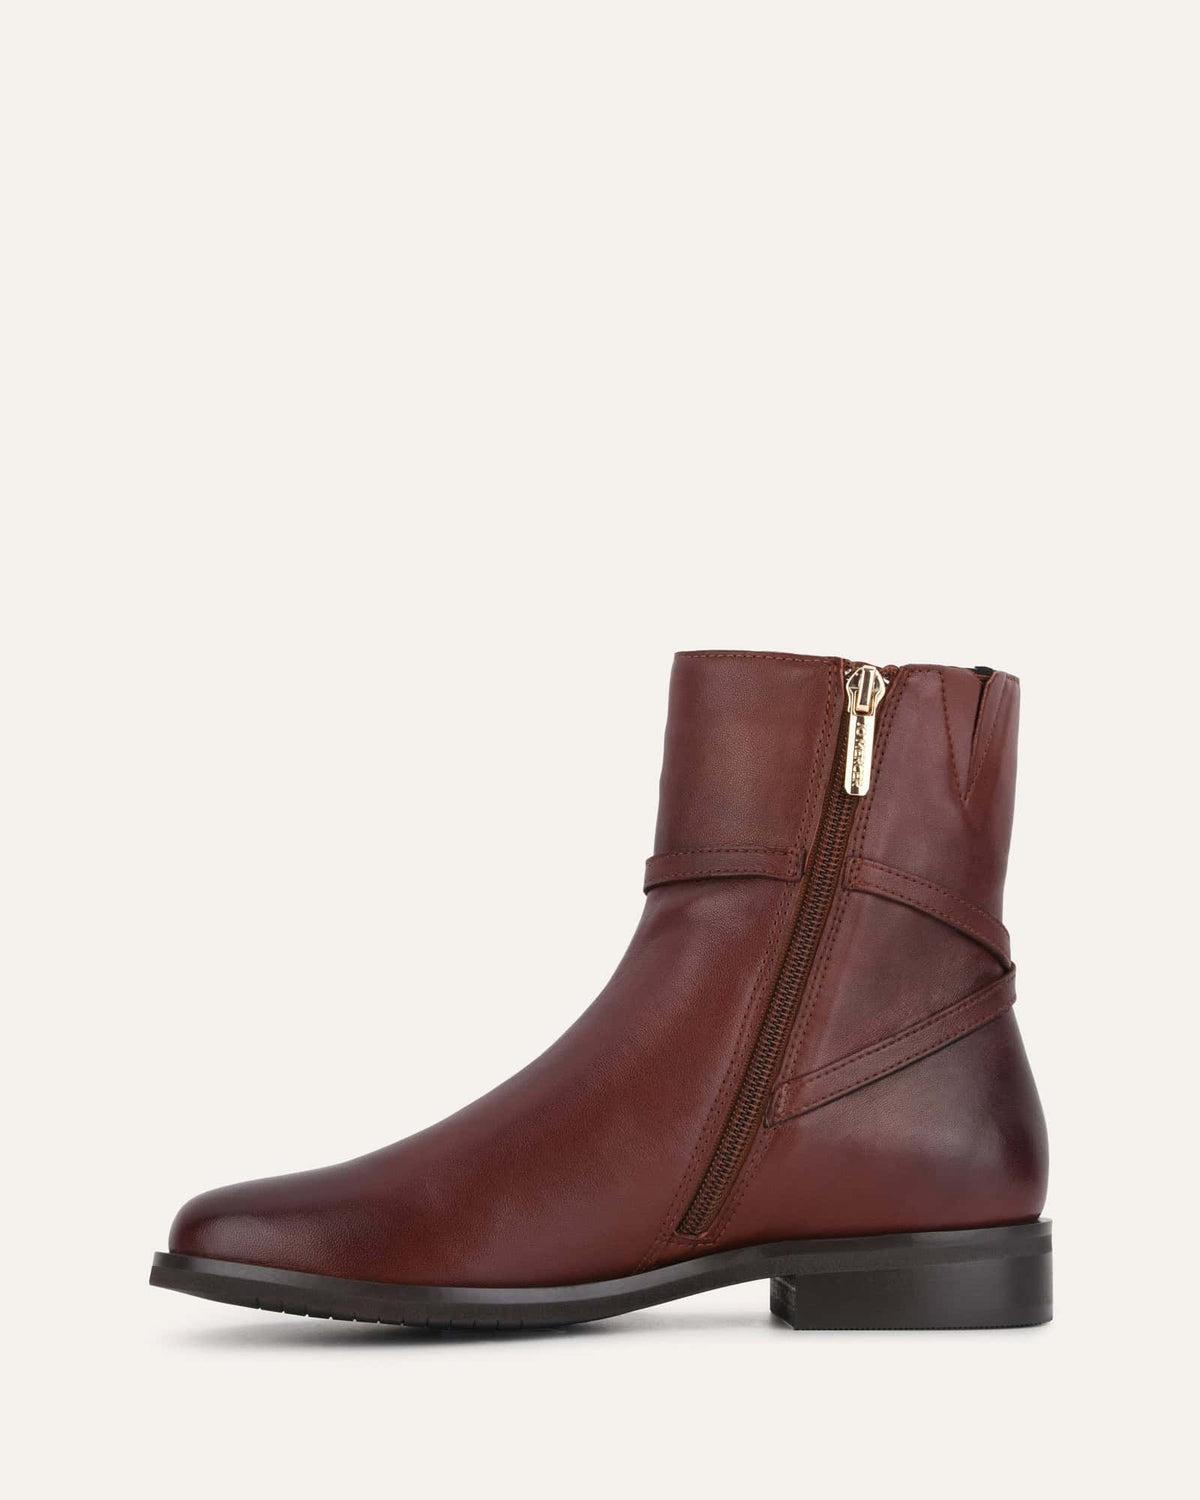 GILBERT FLAT ANKLE BOOTS CHESTNUT LEATHER